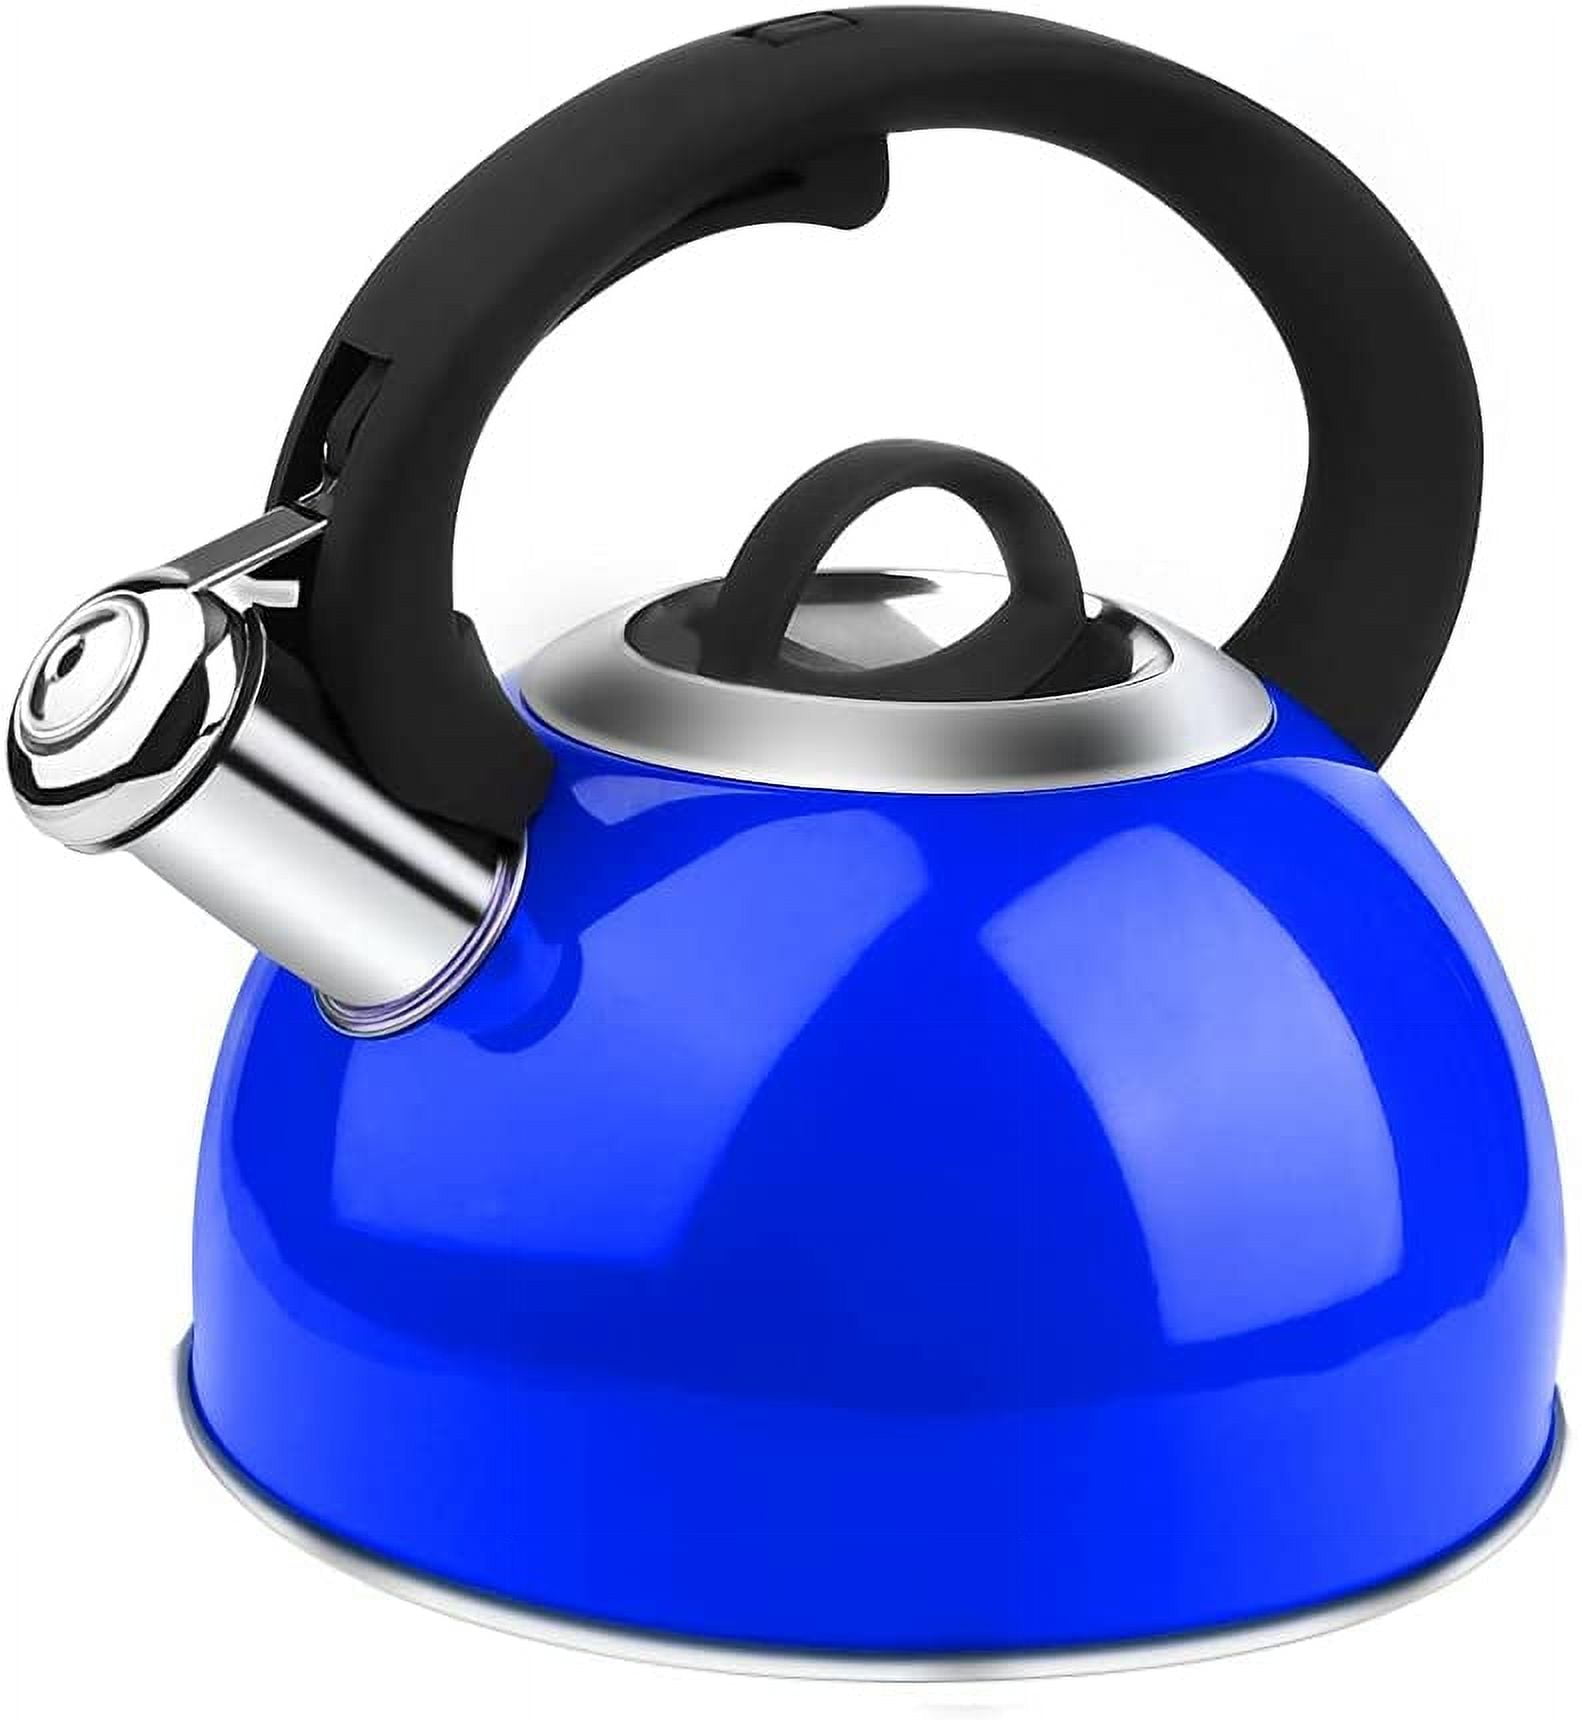  Trenton Gifts Whistling Tea Kettle - Enamel on Steel Teakettle  with Rooster Design - Cute Kitchen Accessories - 1.6 Quart Water Kettle:  Home & Kitchen